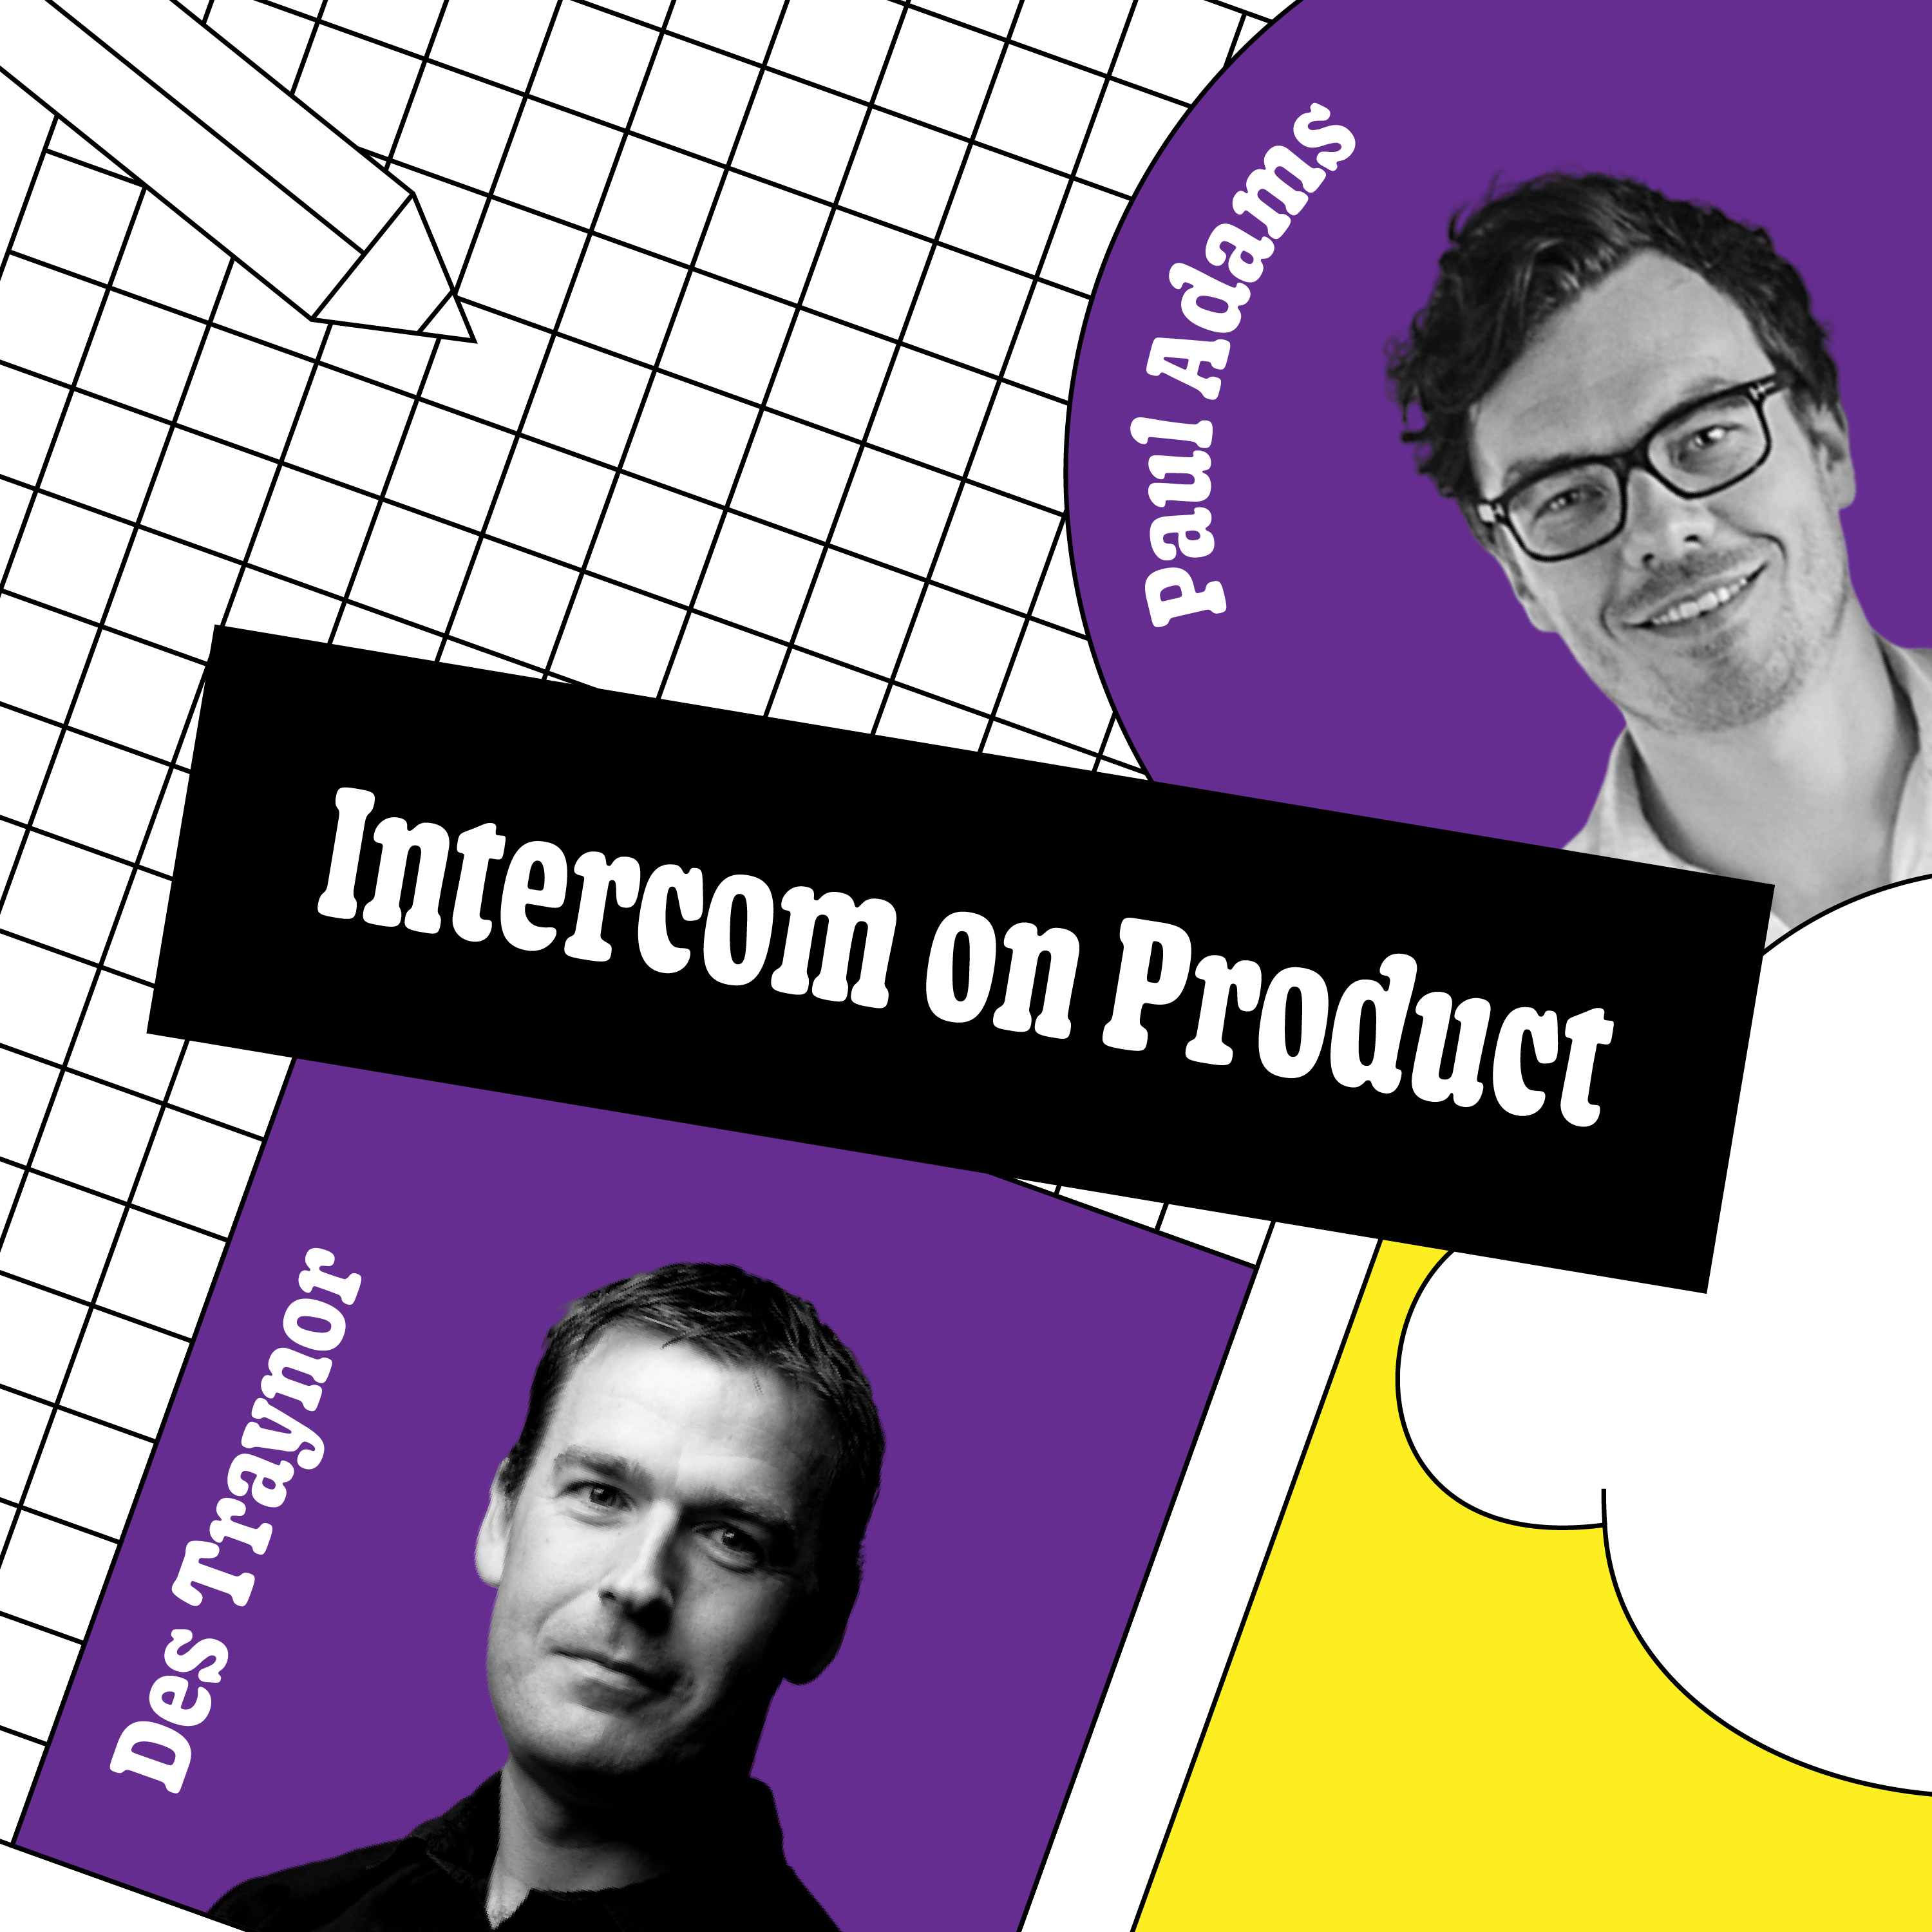 Intercom on Product: Why making every day count is key to progress